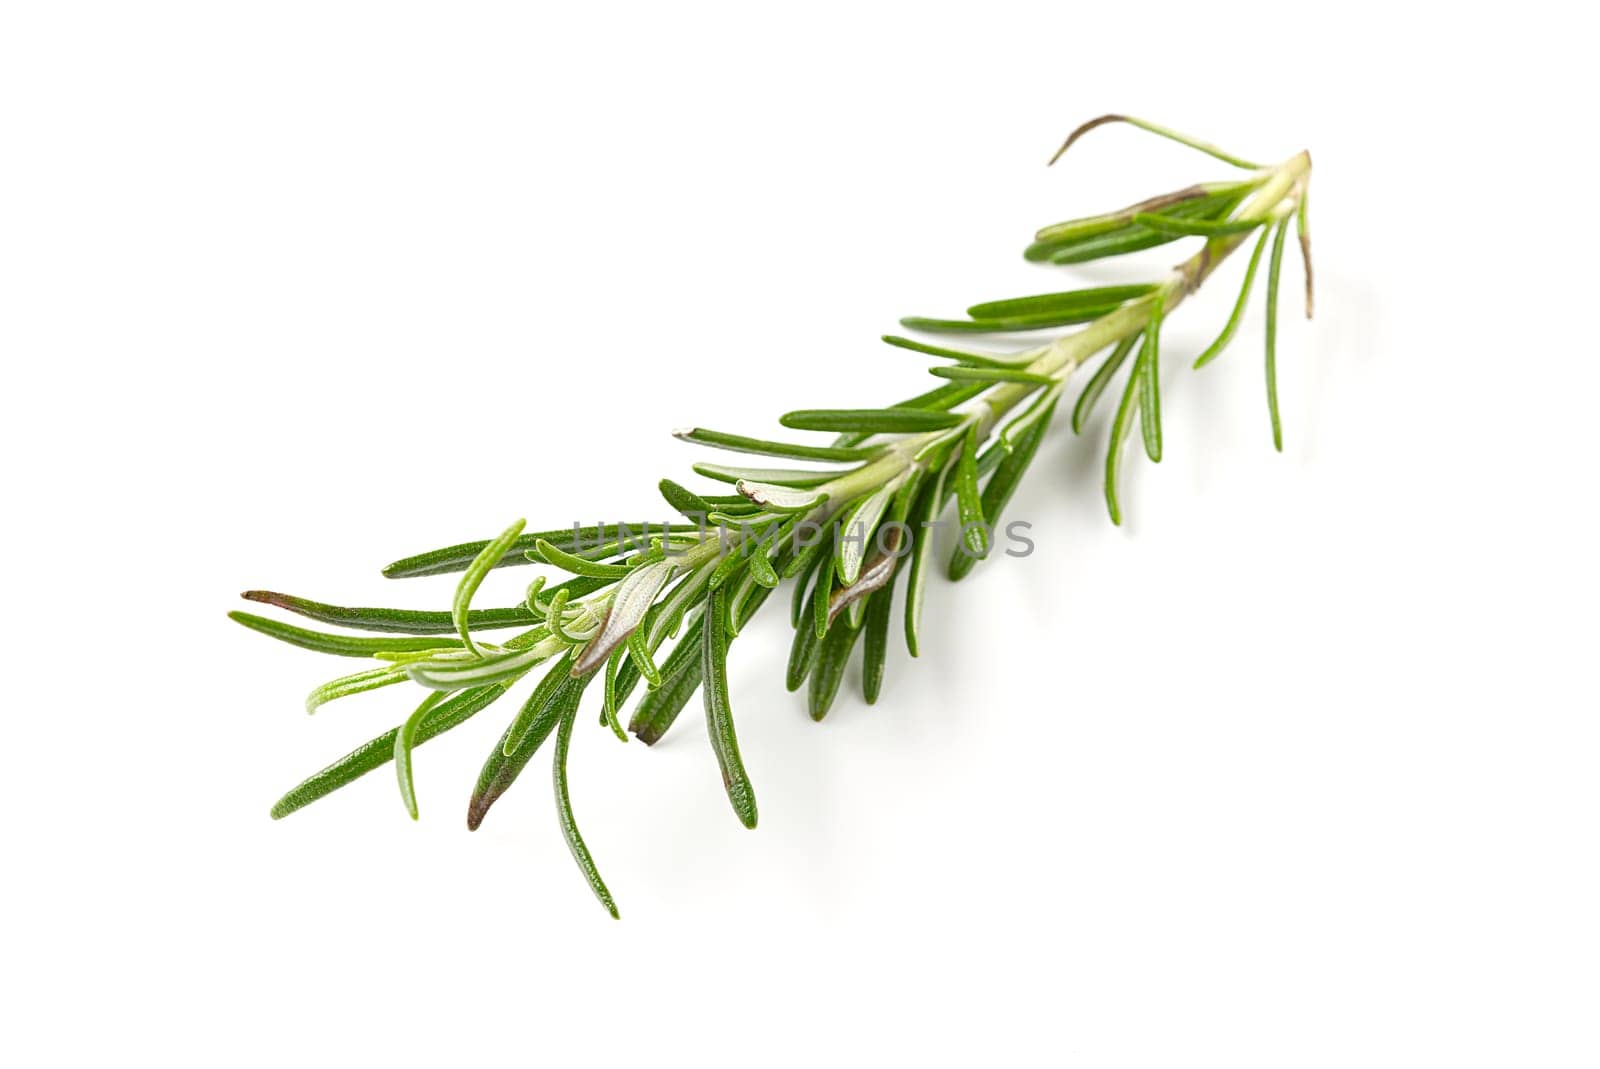 Fresh green sprig of rosemary isolated on a white background. green natural spices